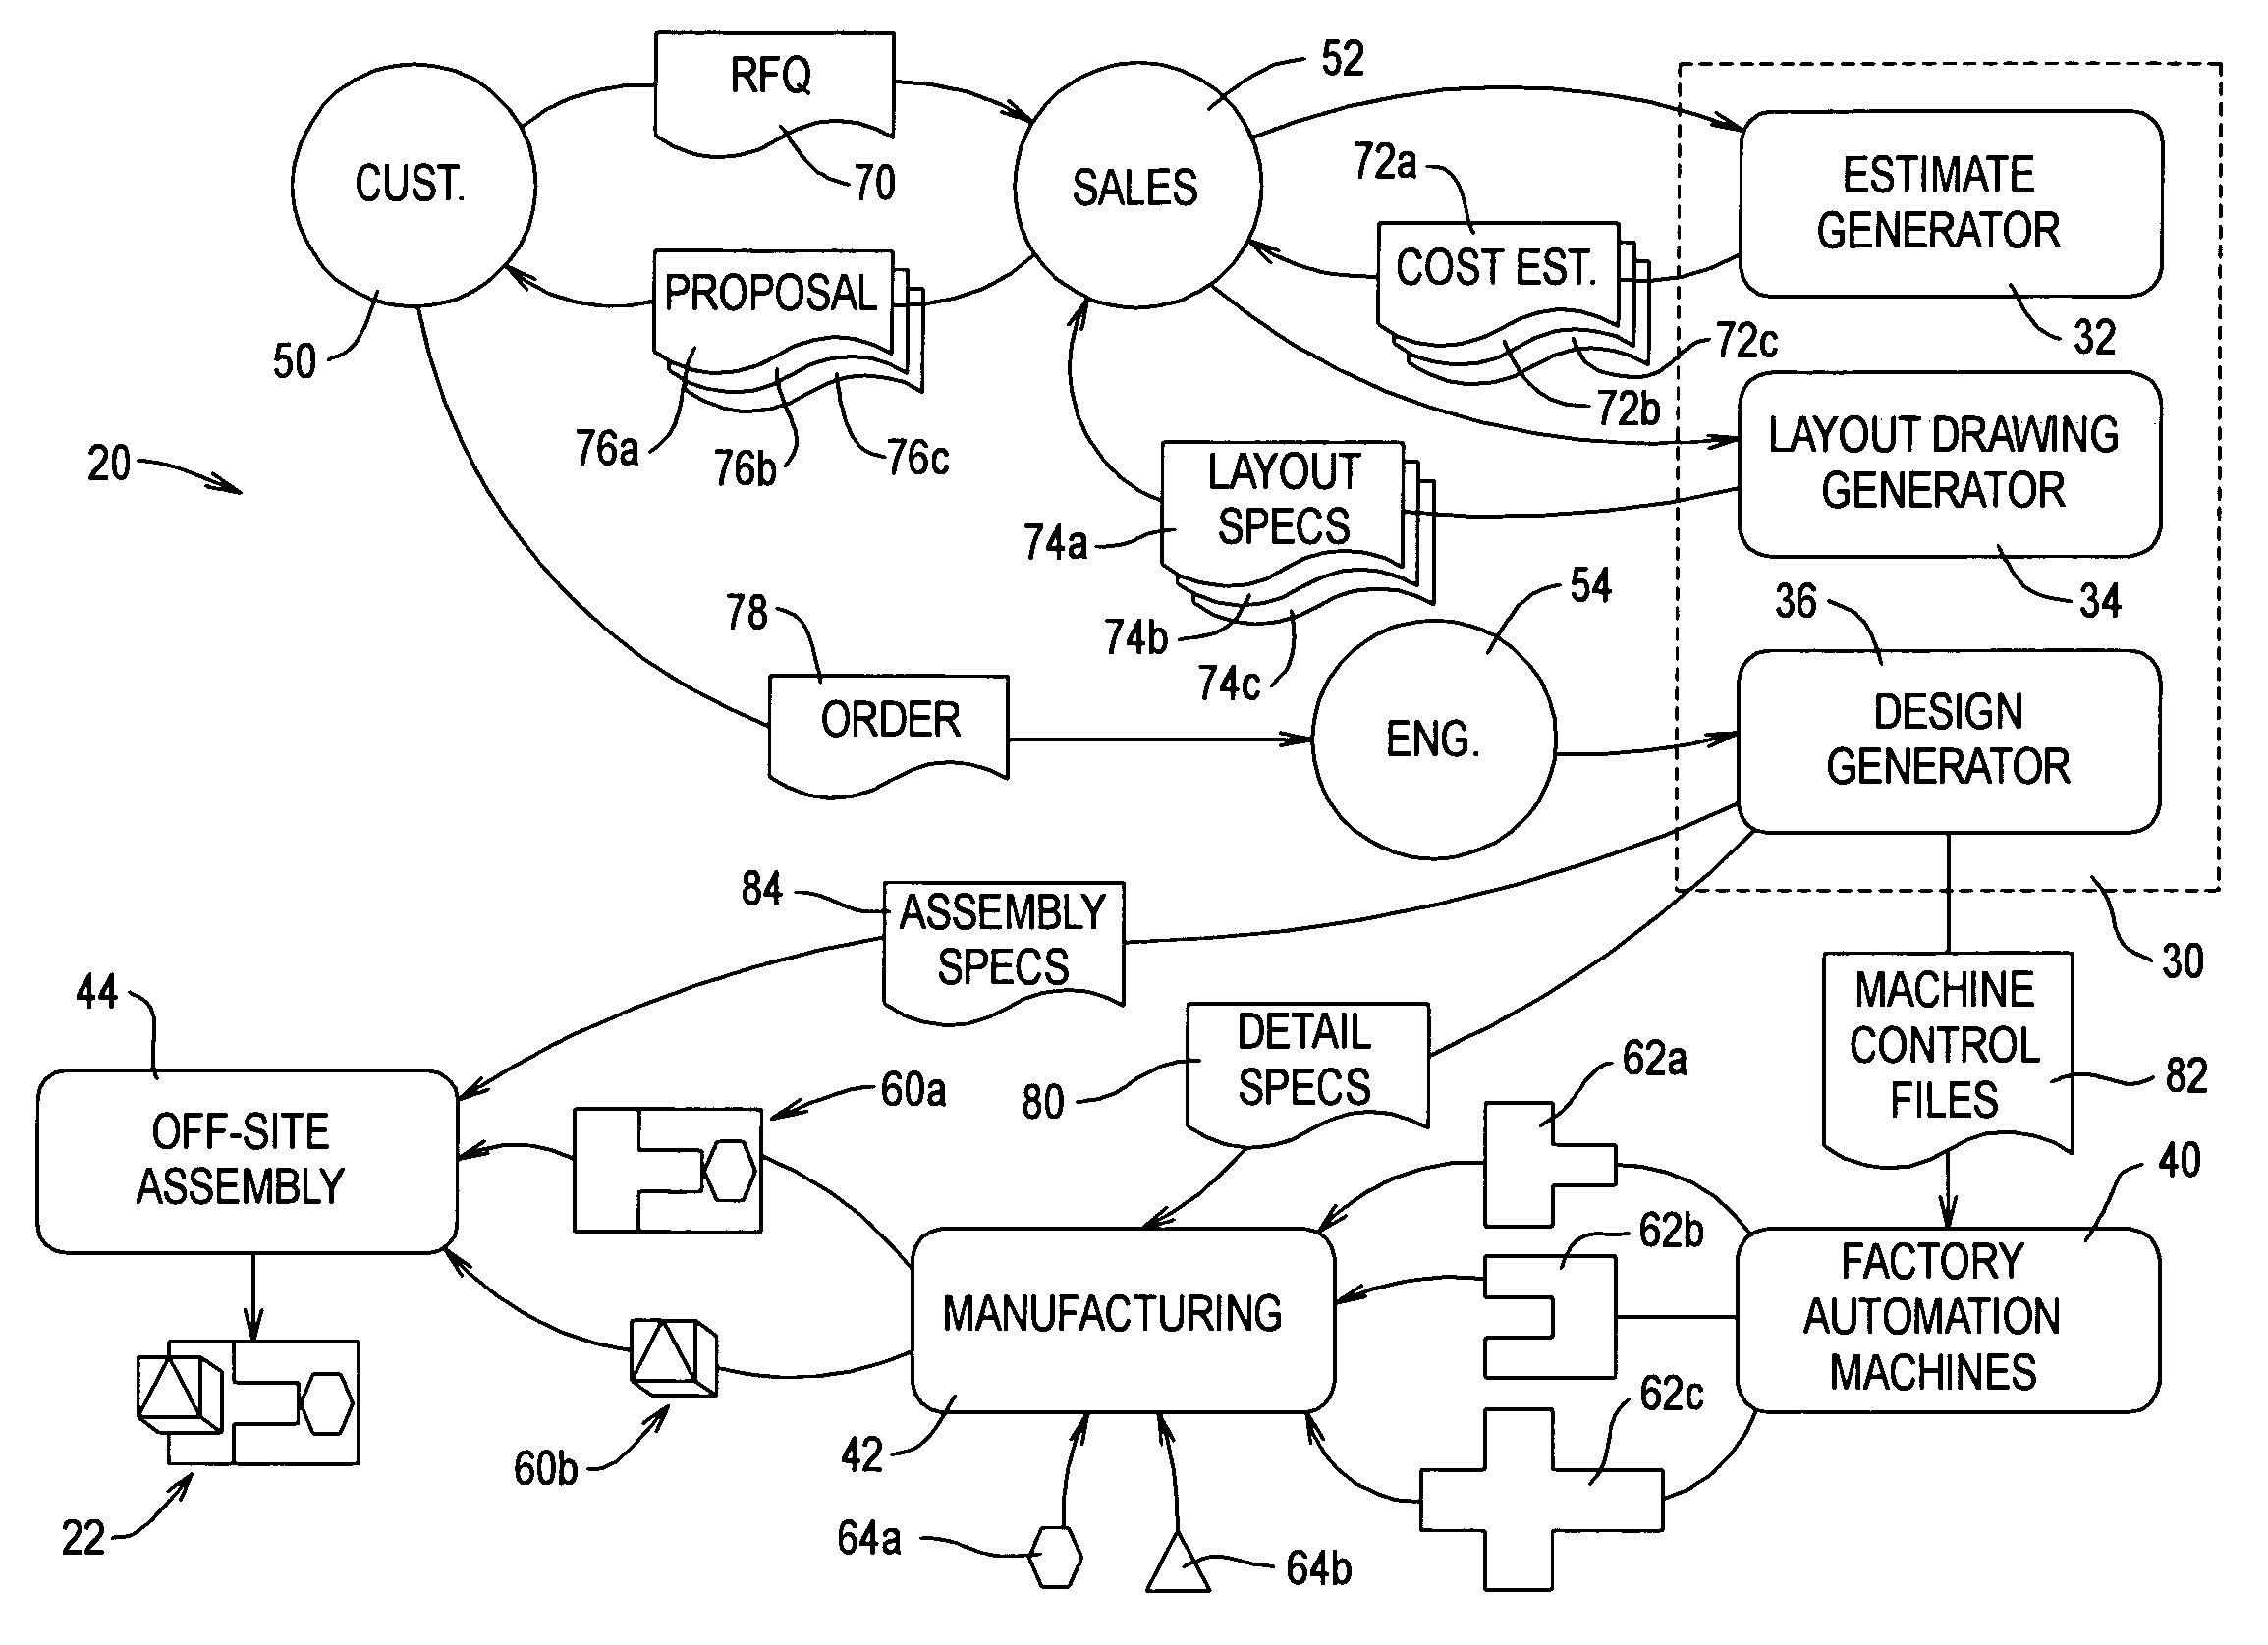 Systems and methods for designing and manufacturing engineered objects